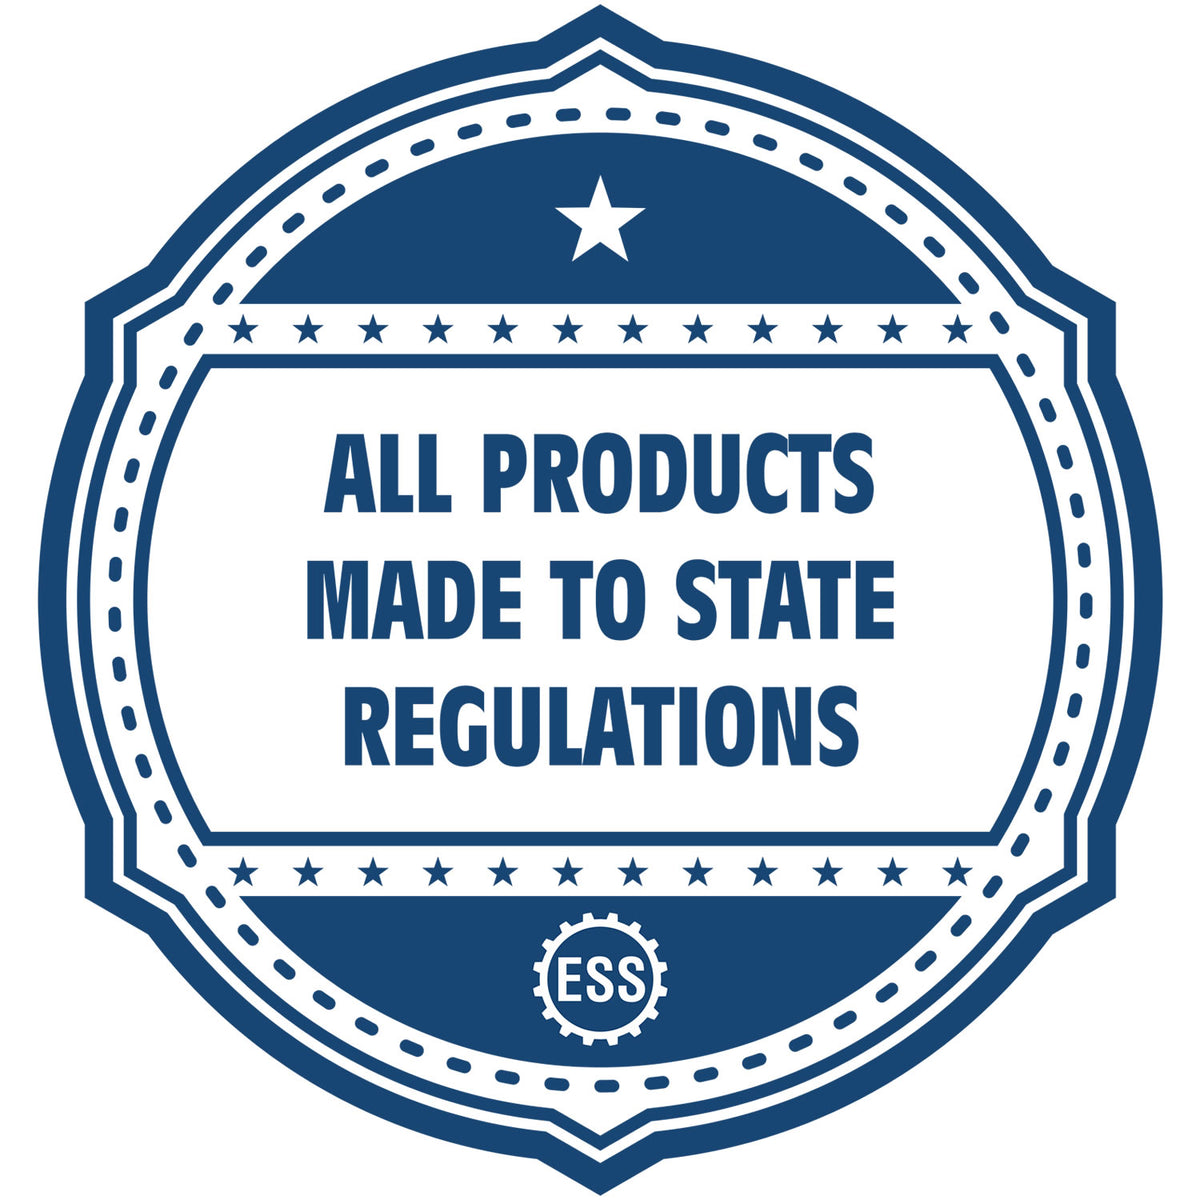 An icon or badge element for the Digital Guam PE Stamp and Electronic Seal for Guam Engineer showing that this product is made in compliance with state regulations.